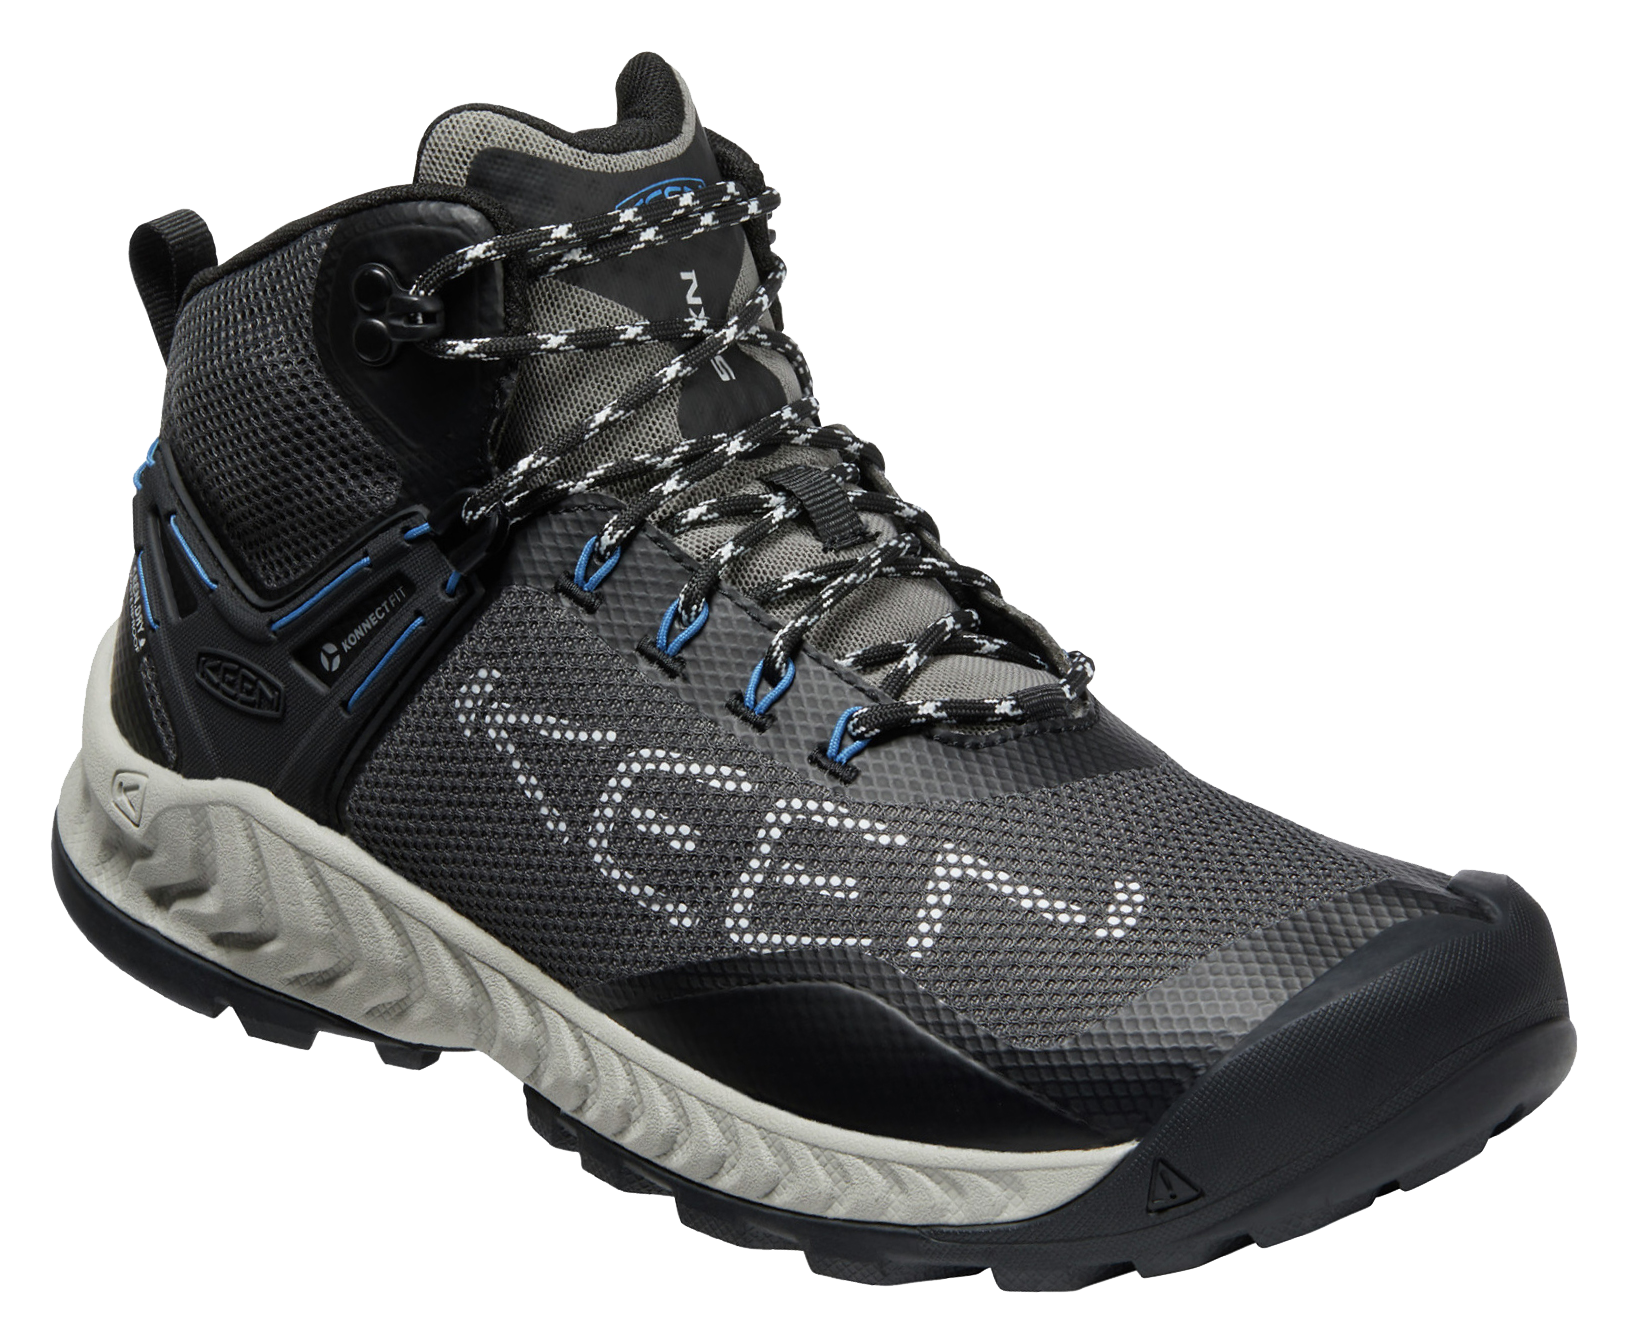 Keen Gore Tex Hiking Boots | susihomes.com